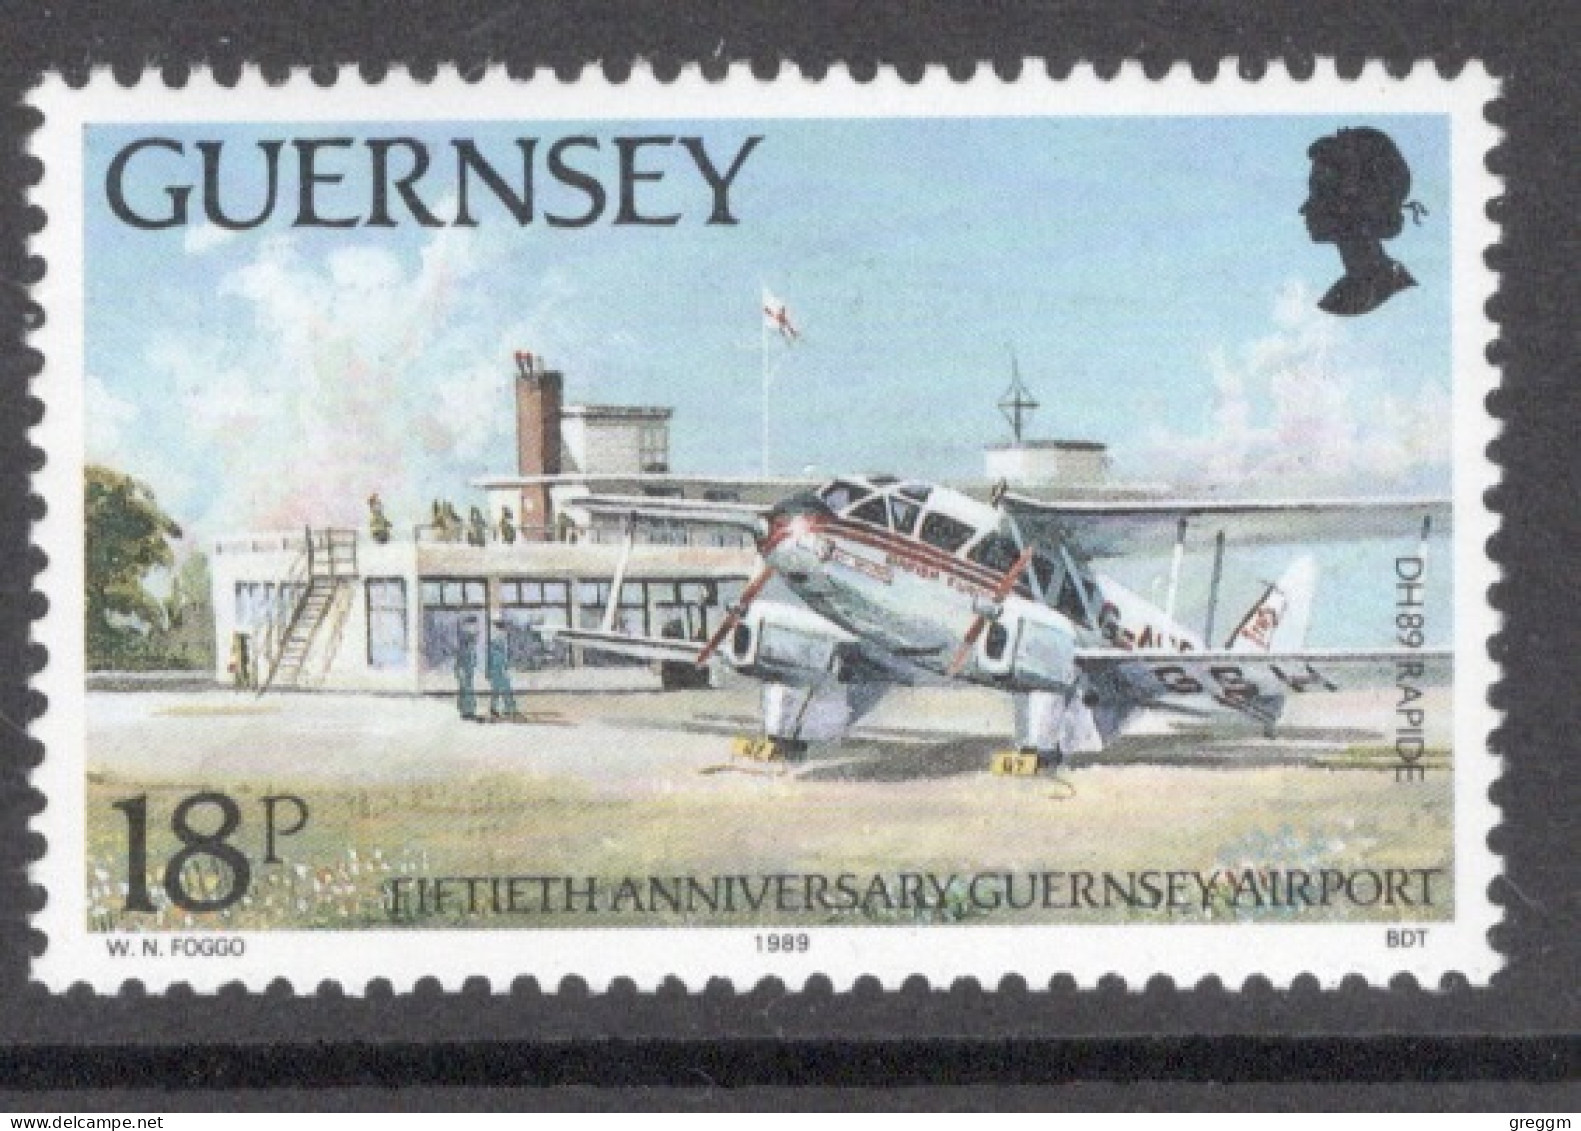 Guernsey 1989  Single Stamp Showing The 50th Anniversary Of The Guernsey Airport In Mounted Mint - Guernsey